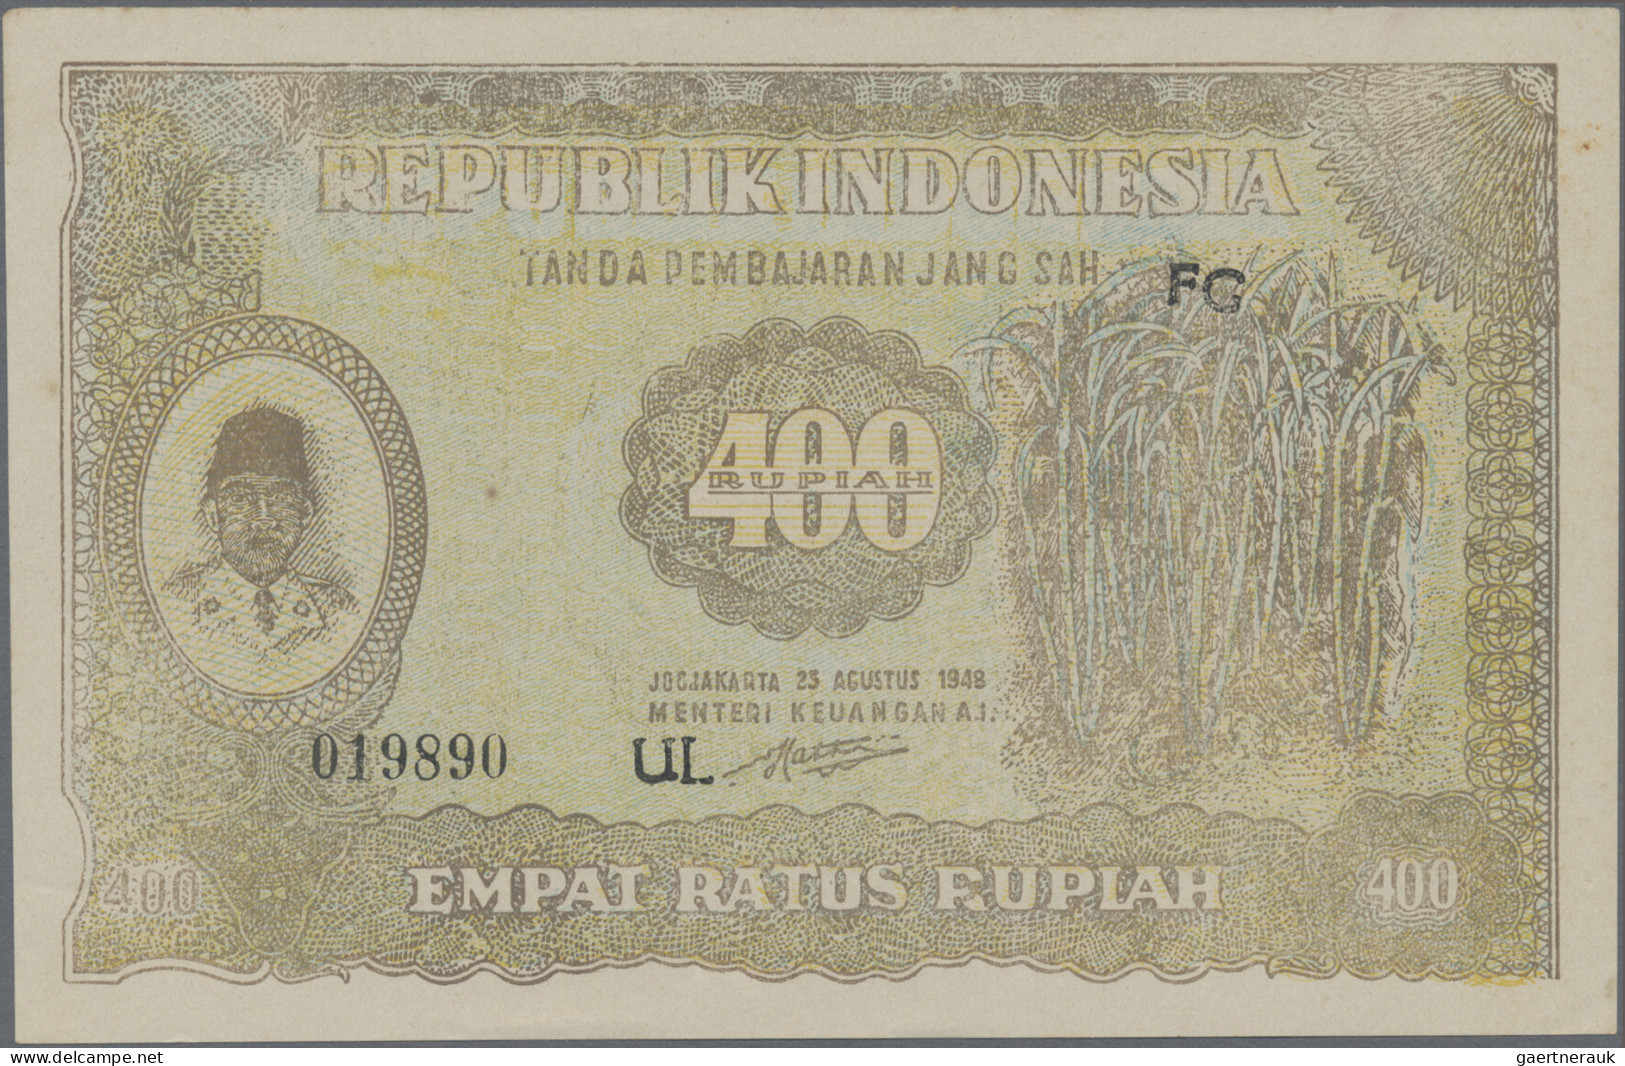 Indonesia: Republic Indonesia, lot with 5 banknotes, series 1947-1949, with 10 a